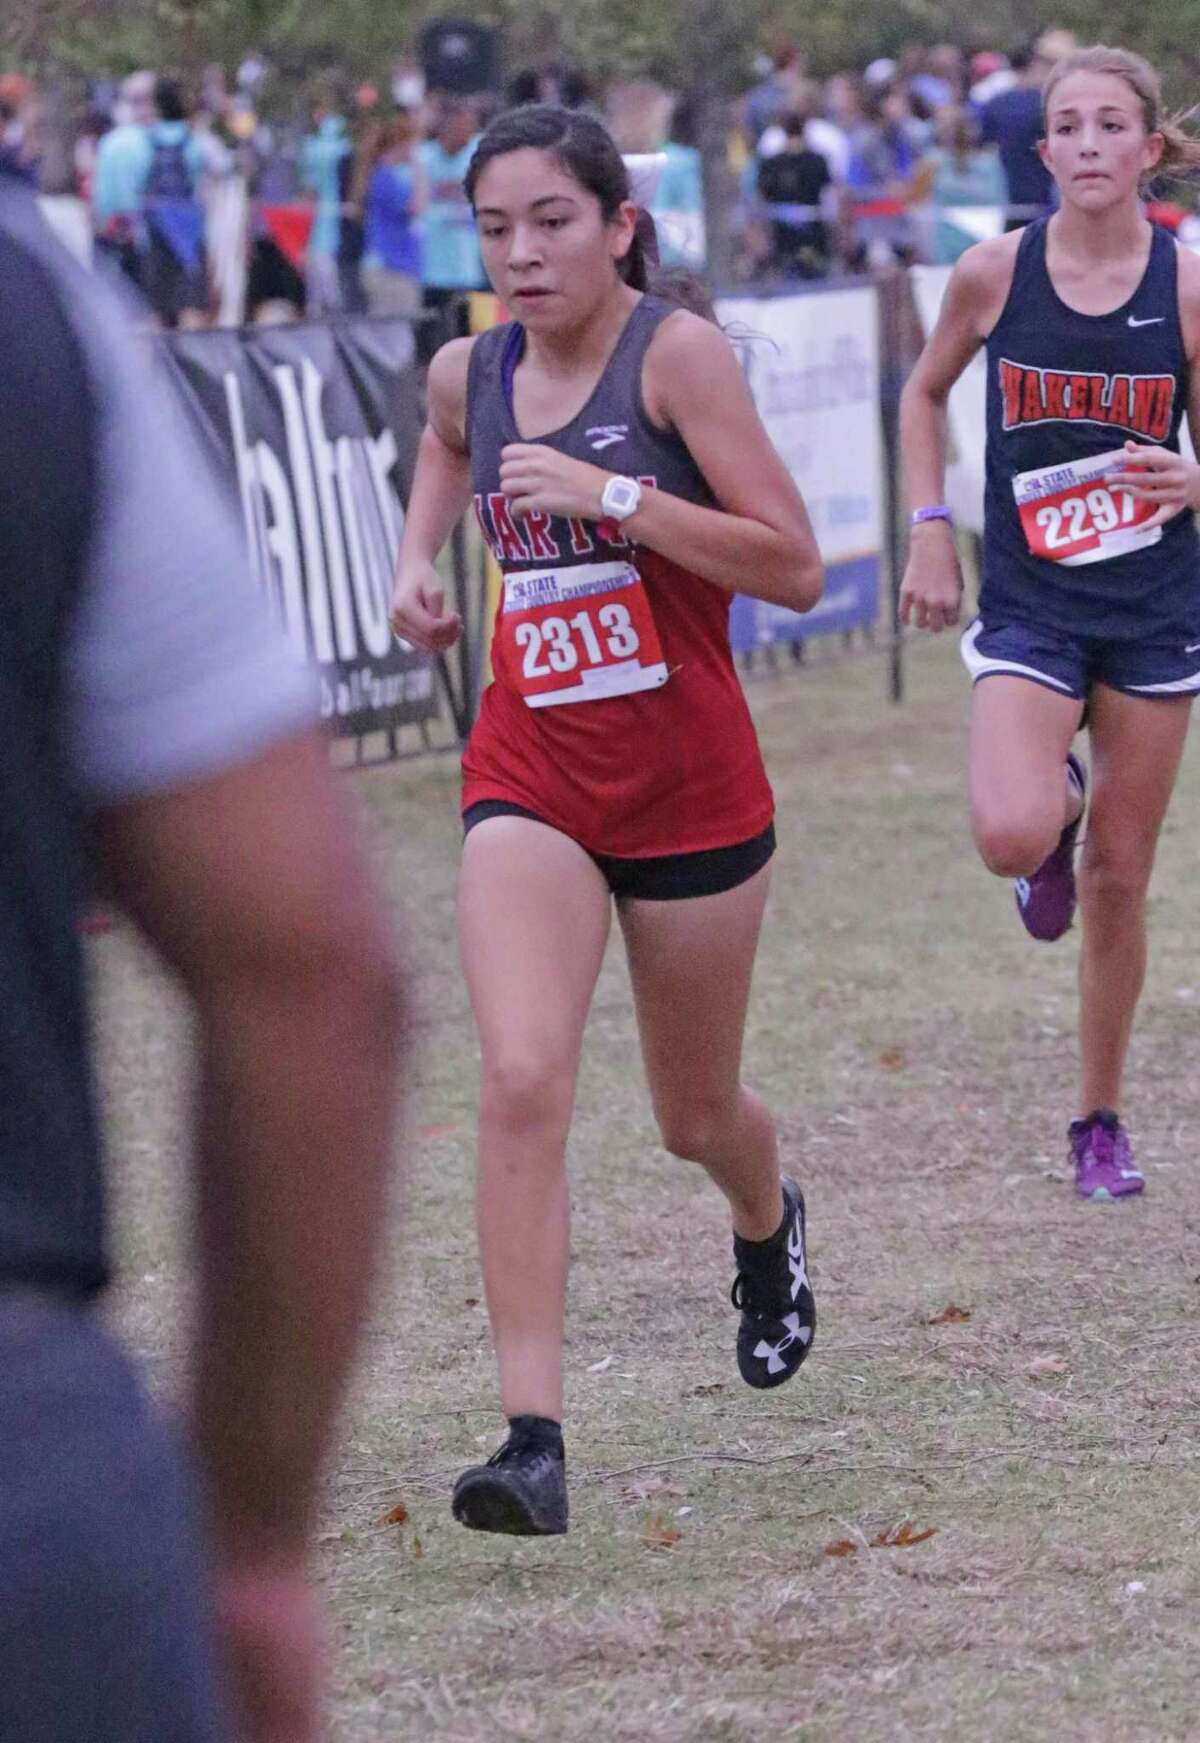 Martin’s Samantha Gonzalez, United’s Alex Munoz and Nixon’s Alexa Rodriguez lead a contingency of Laredo runners that will compete on Monday at the Region IV Cross Country Championships looking for a state berth. Gonzalez and Rodriguez were the city’s two representatives a year ago while Munoz nearly joined them.